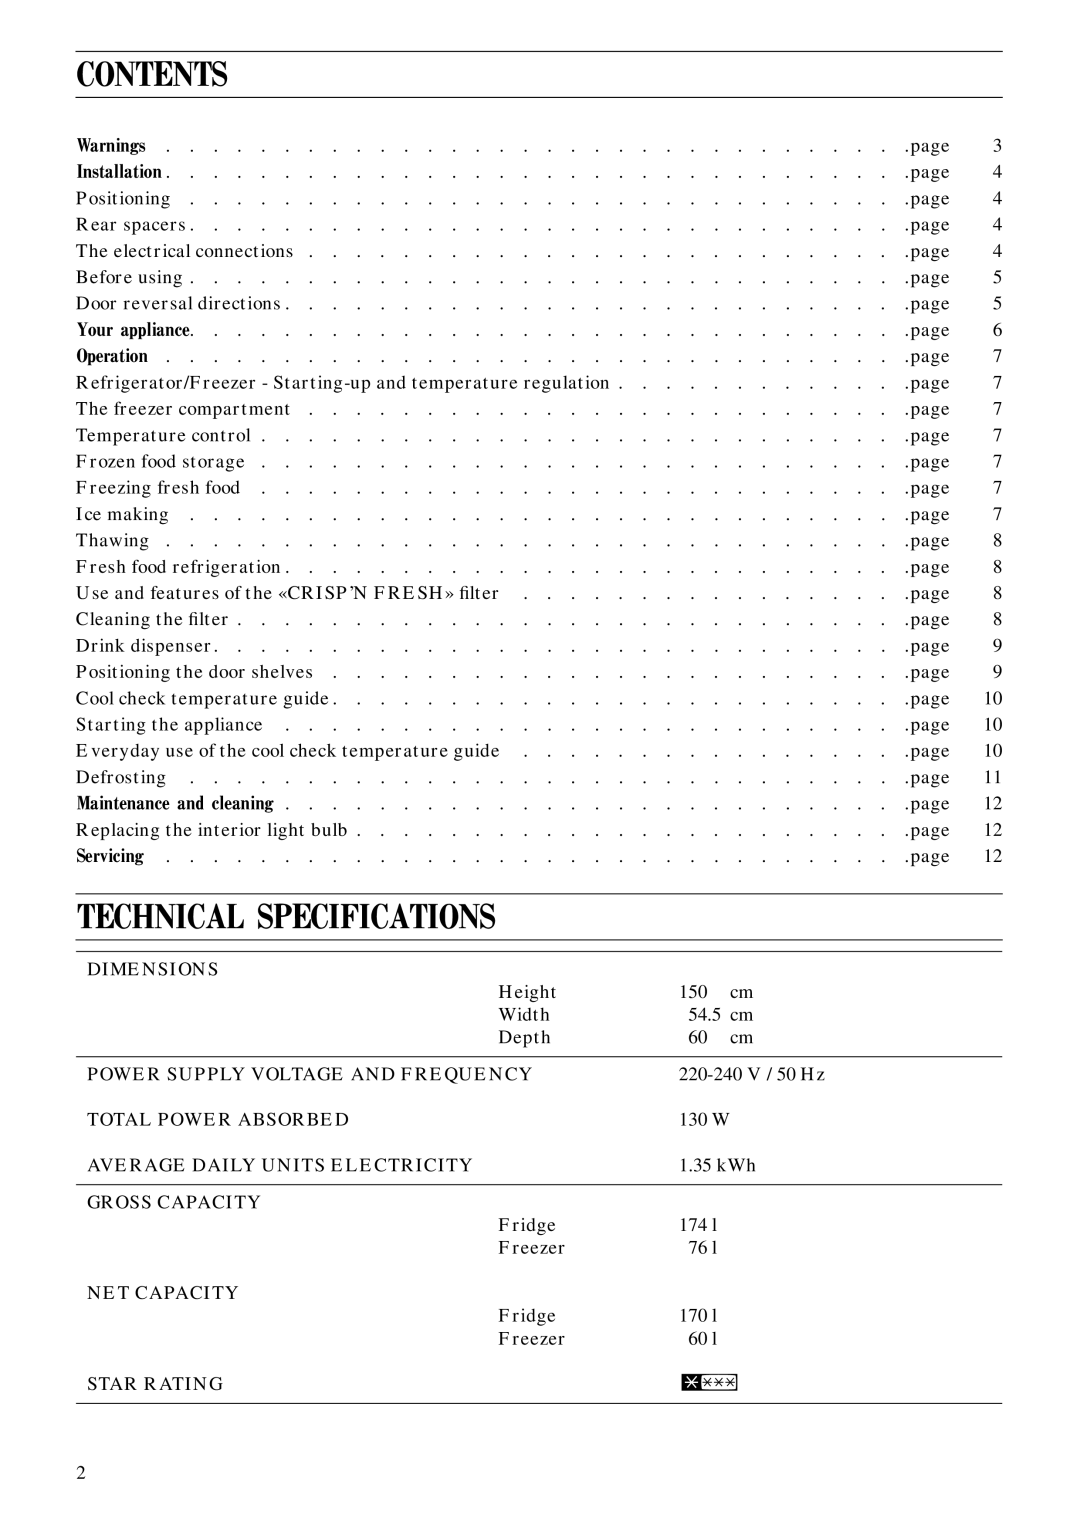 Zanussi ZFCA 62/26 manual Contents, Technical Specifications 